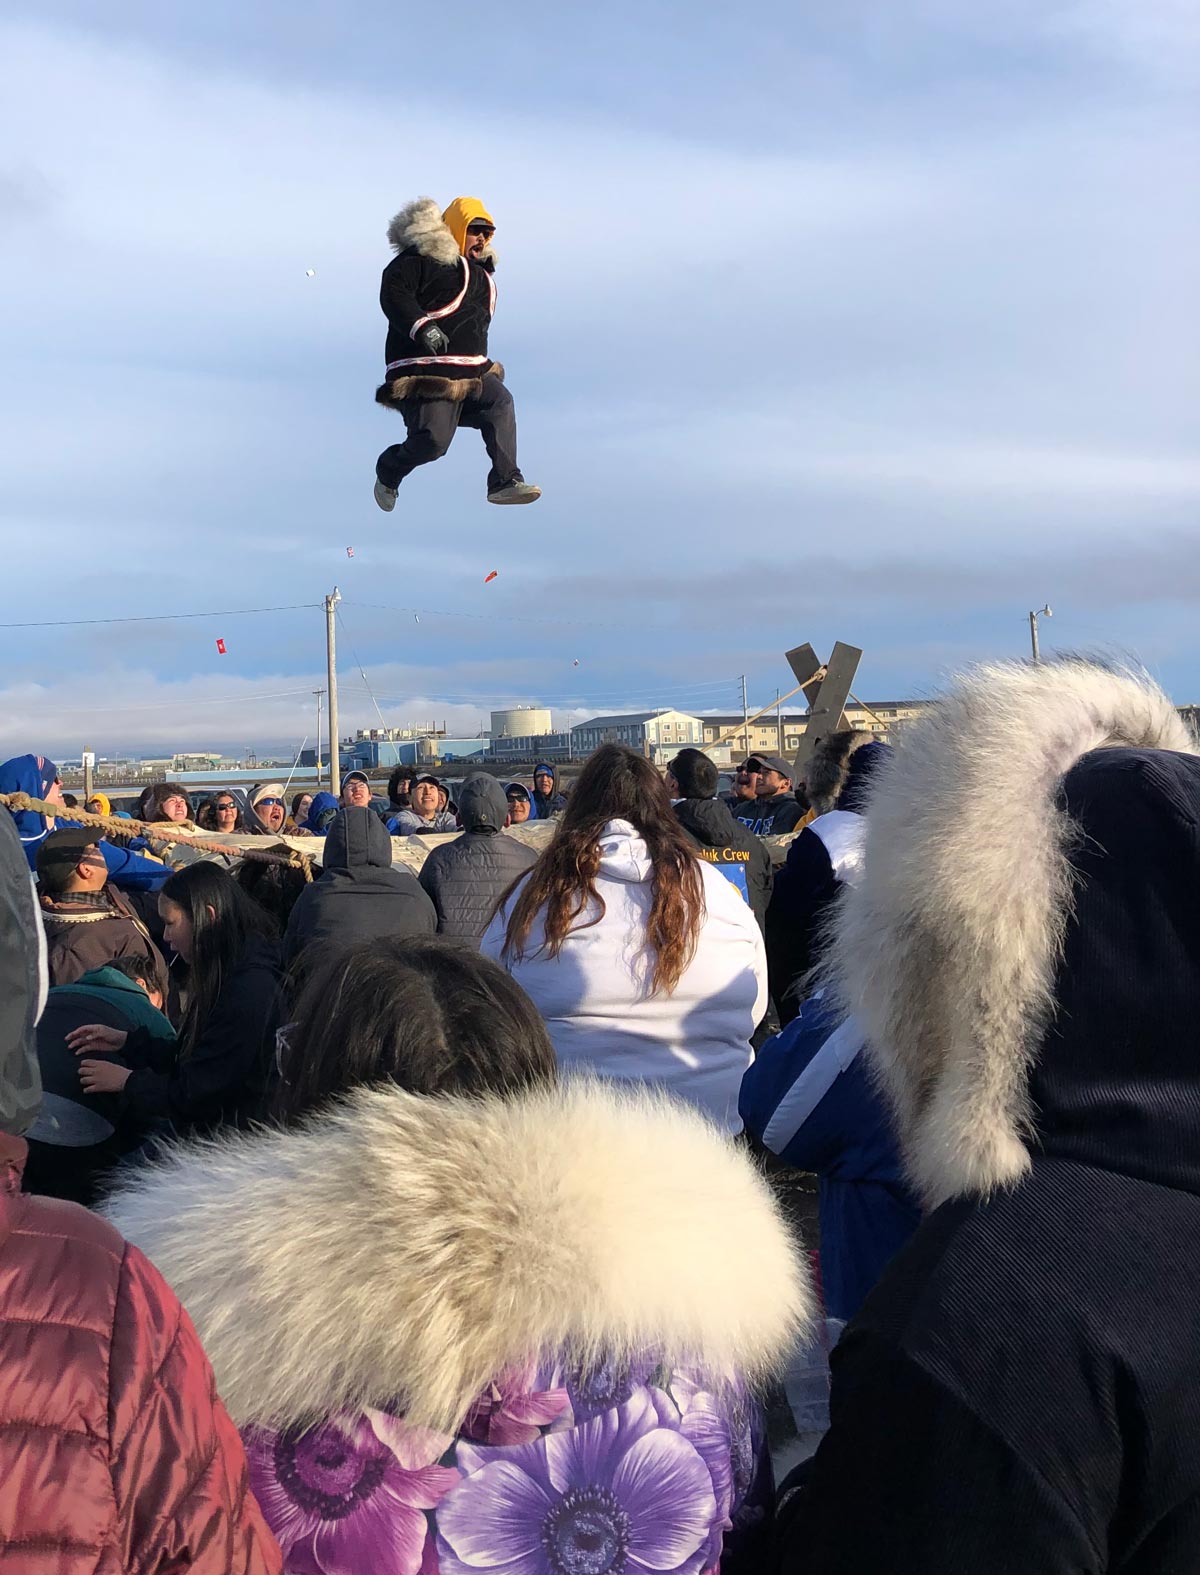 man being thrown up in a blanket toss